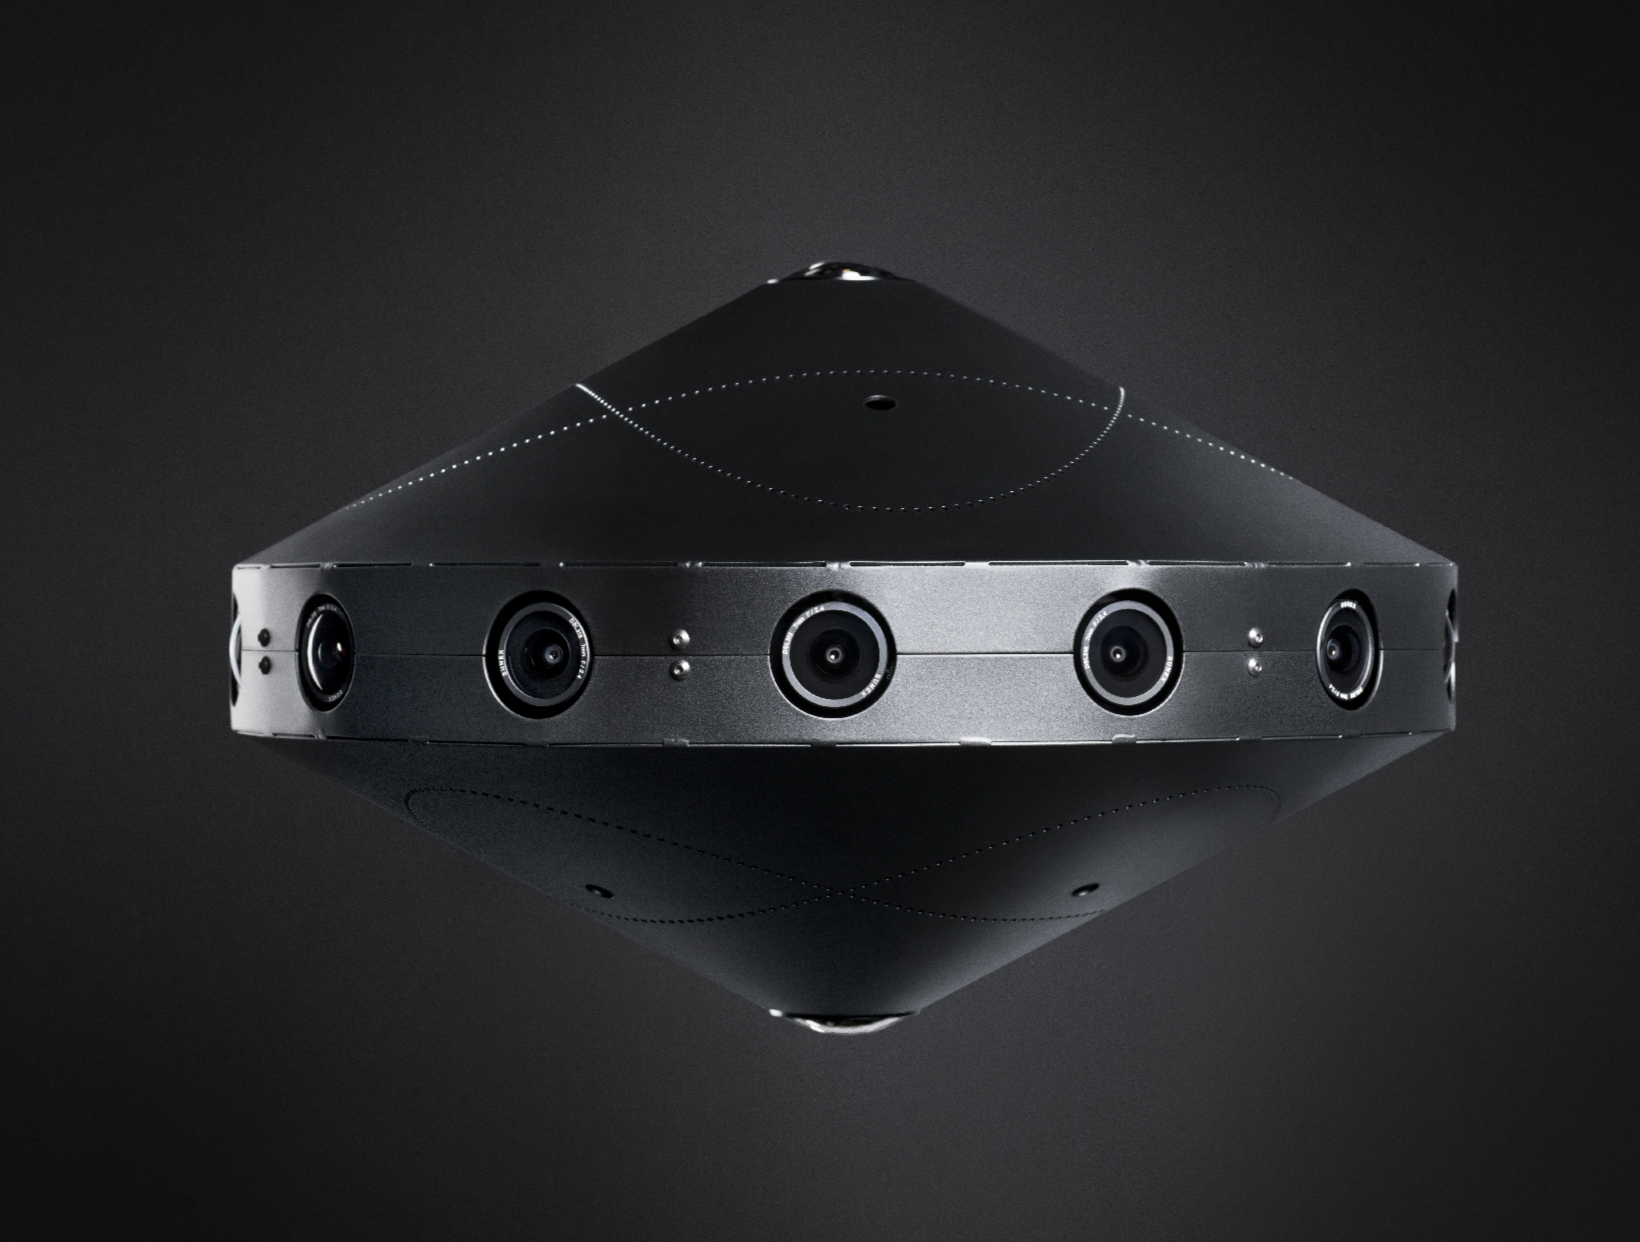 Facebook Has Designed A 360-Degree Camera For The Open Source Community